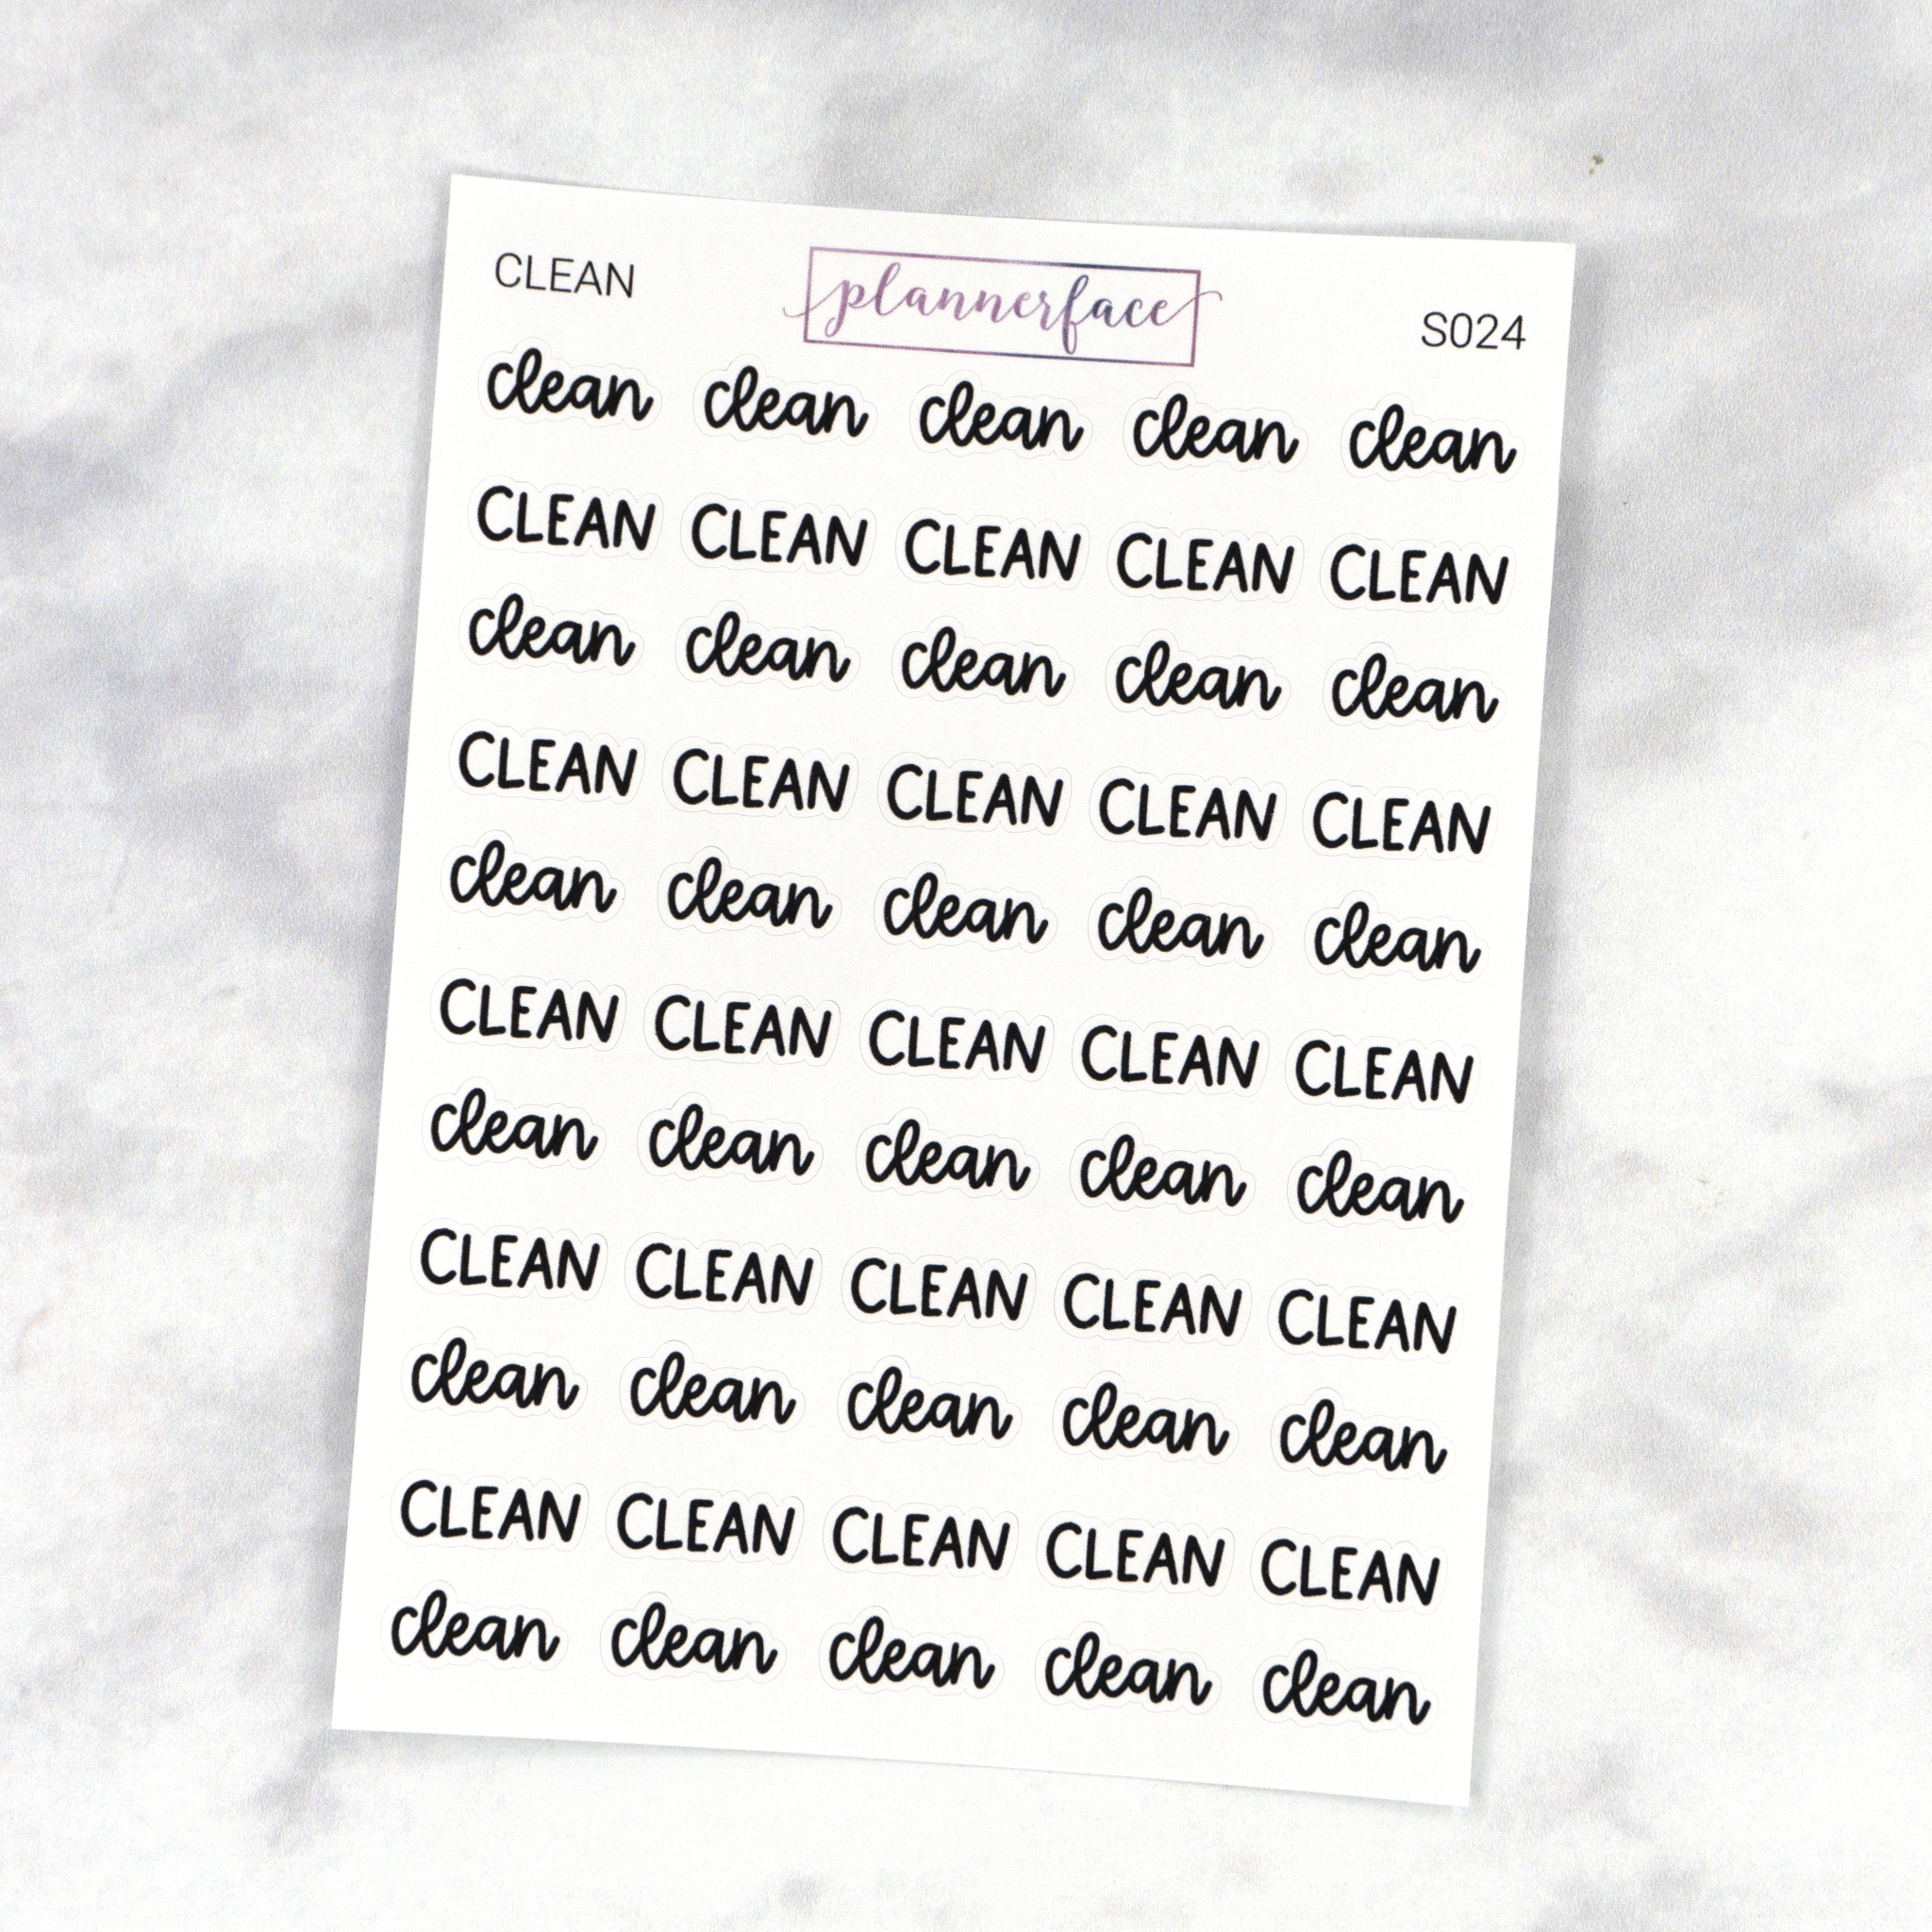 Clean | Scripts by Plannerface